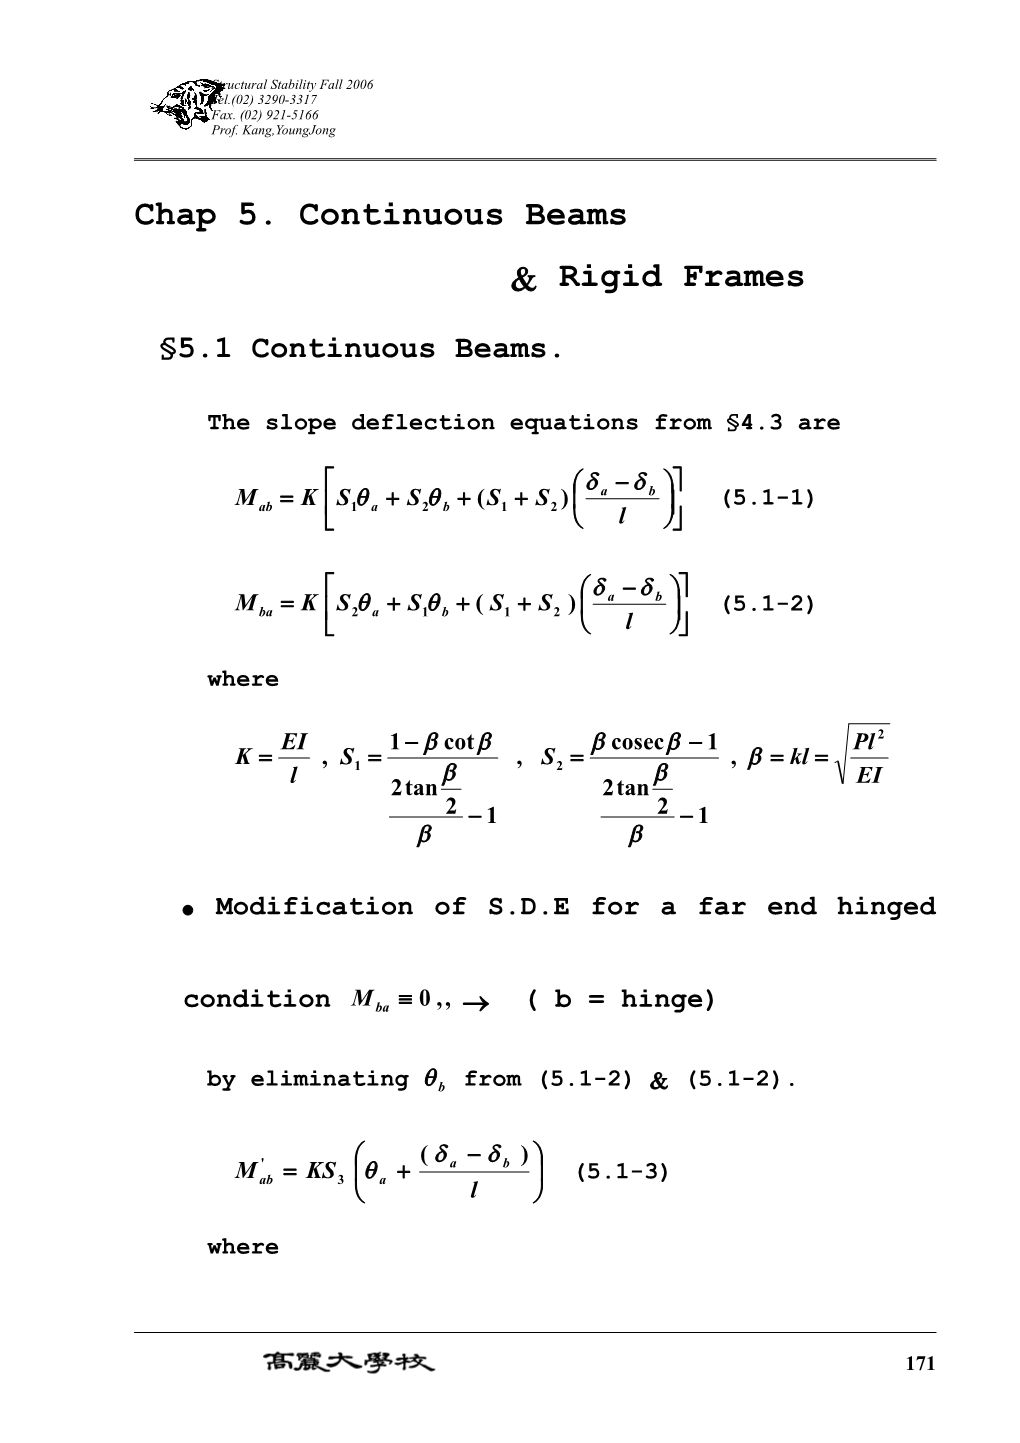 The Slope Deflection Equations from 4.3 Are